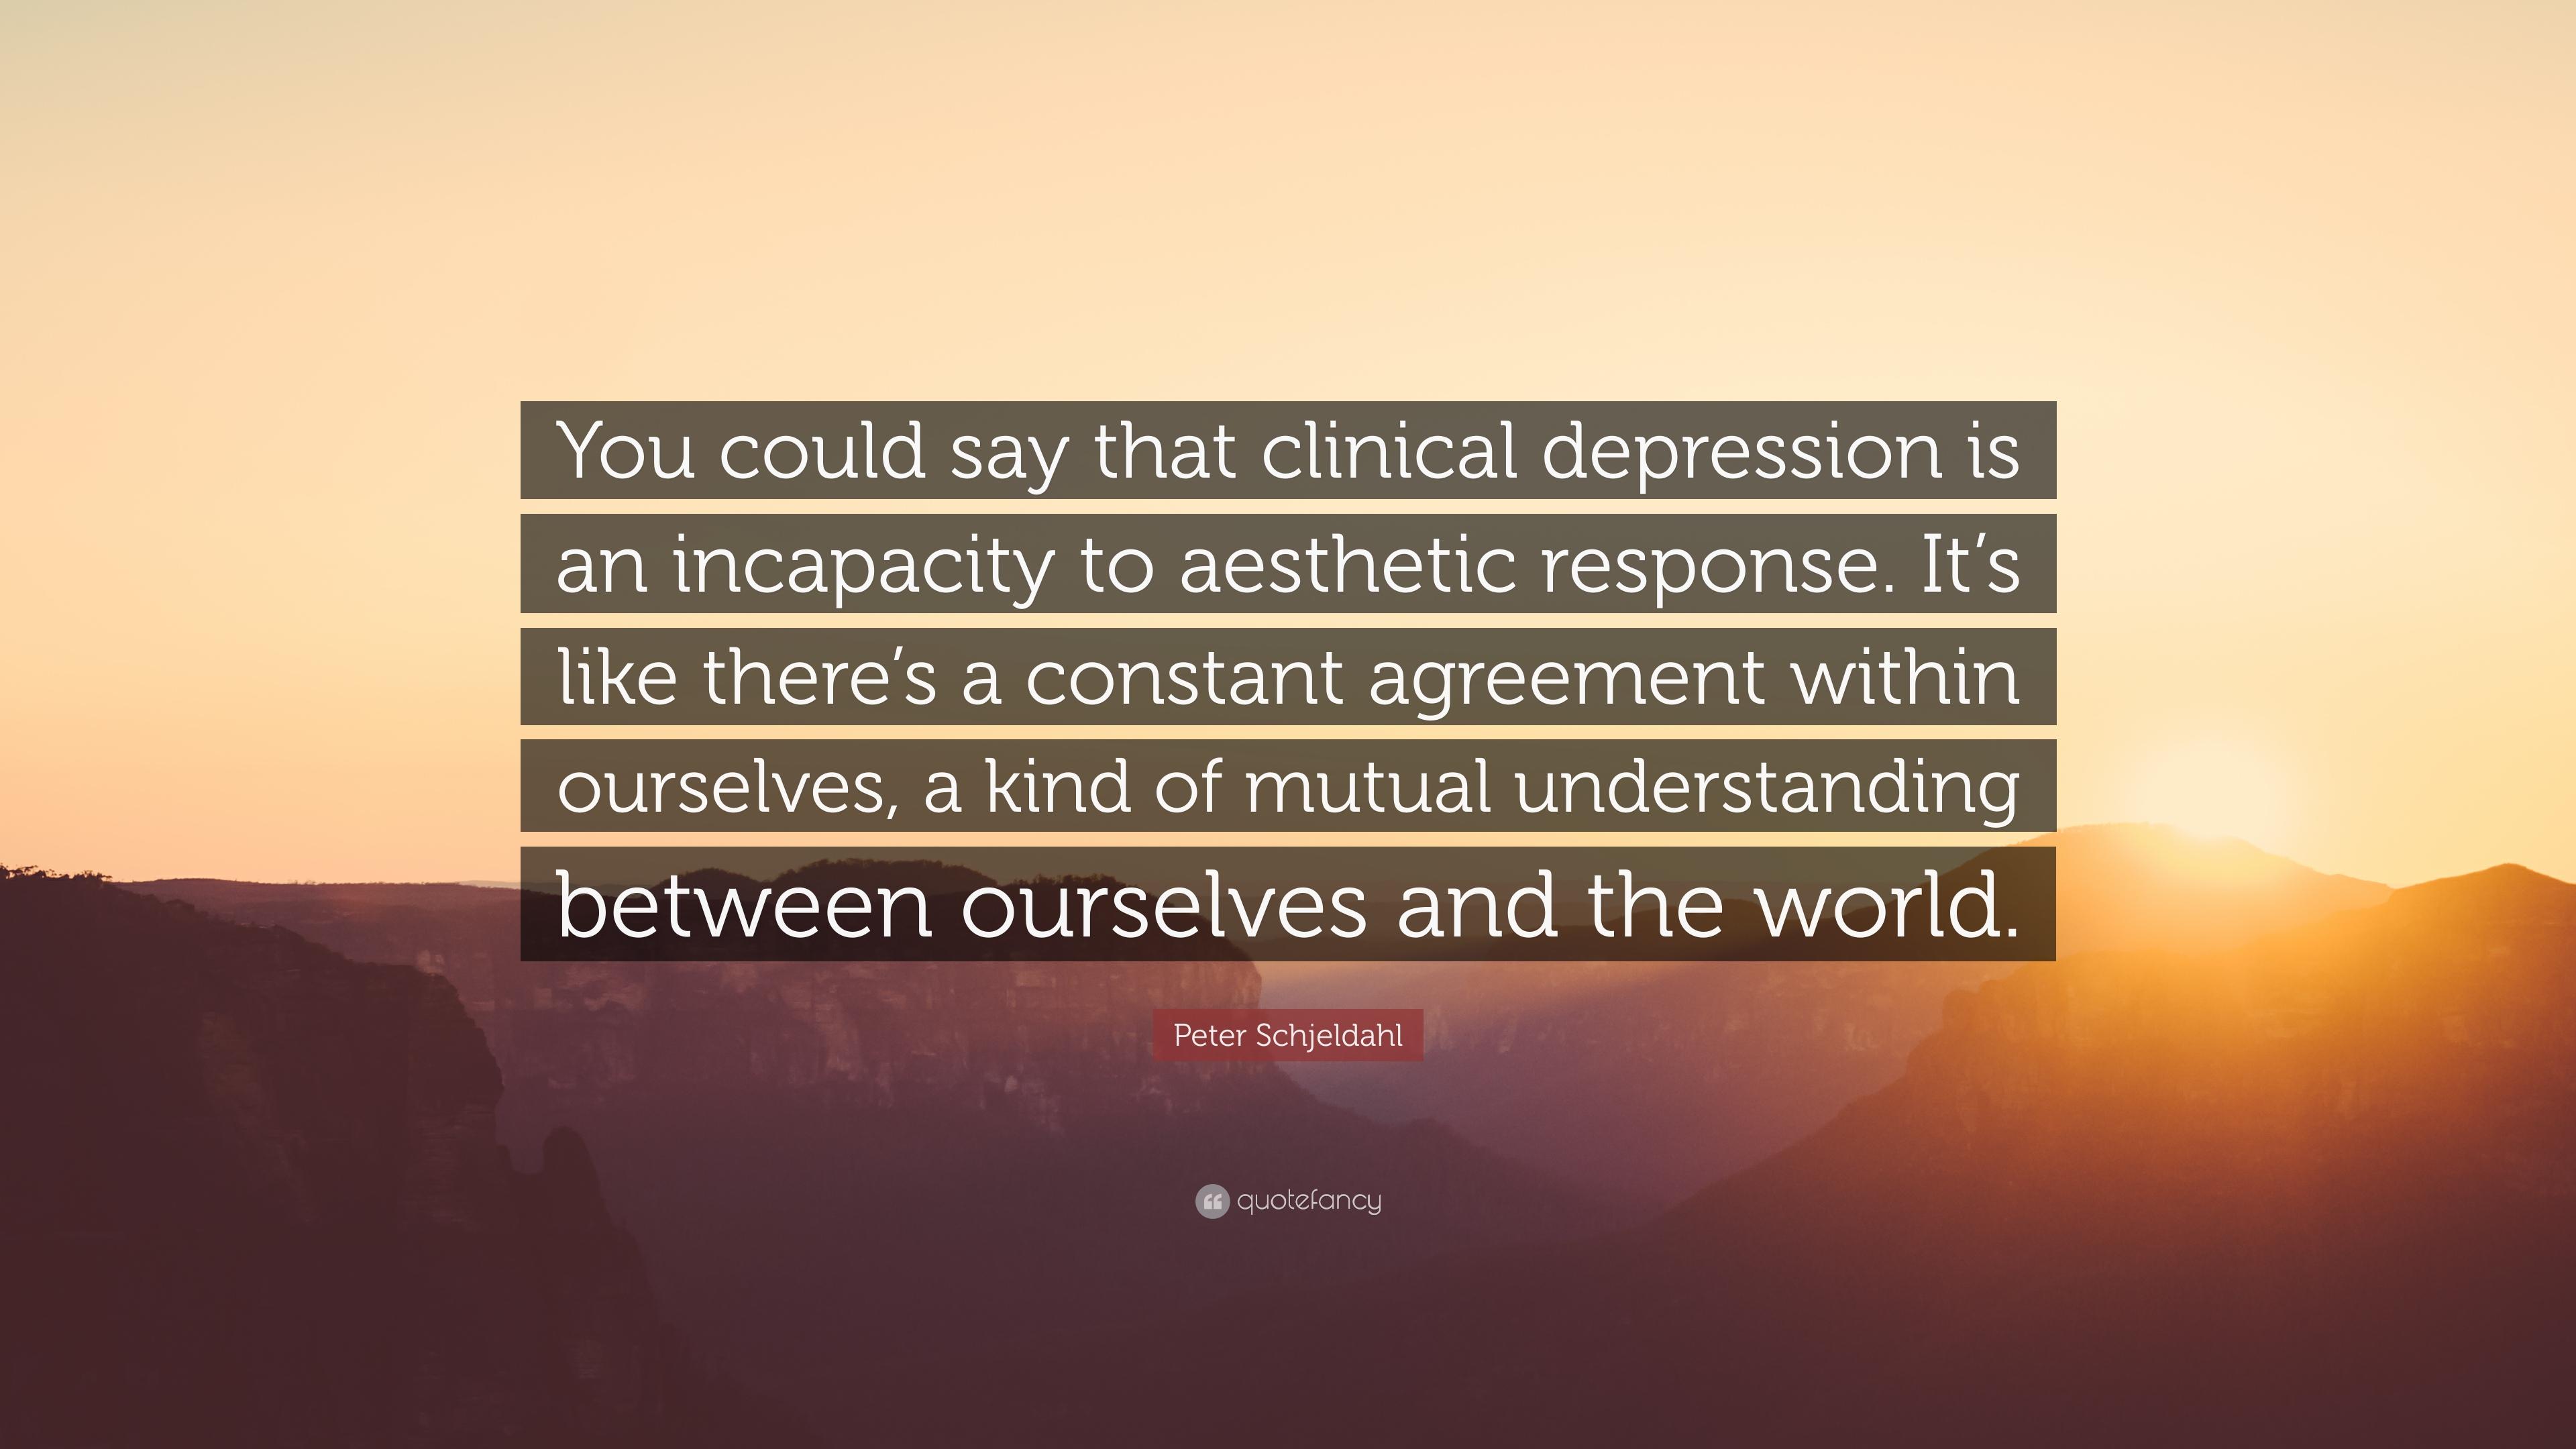 Peter Schjeldahl Quote: “You could say that clinical depression is